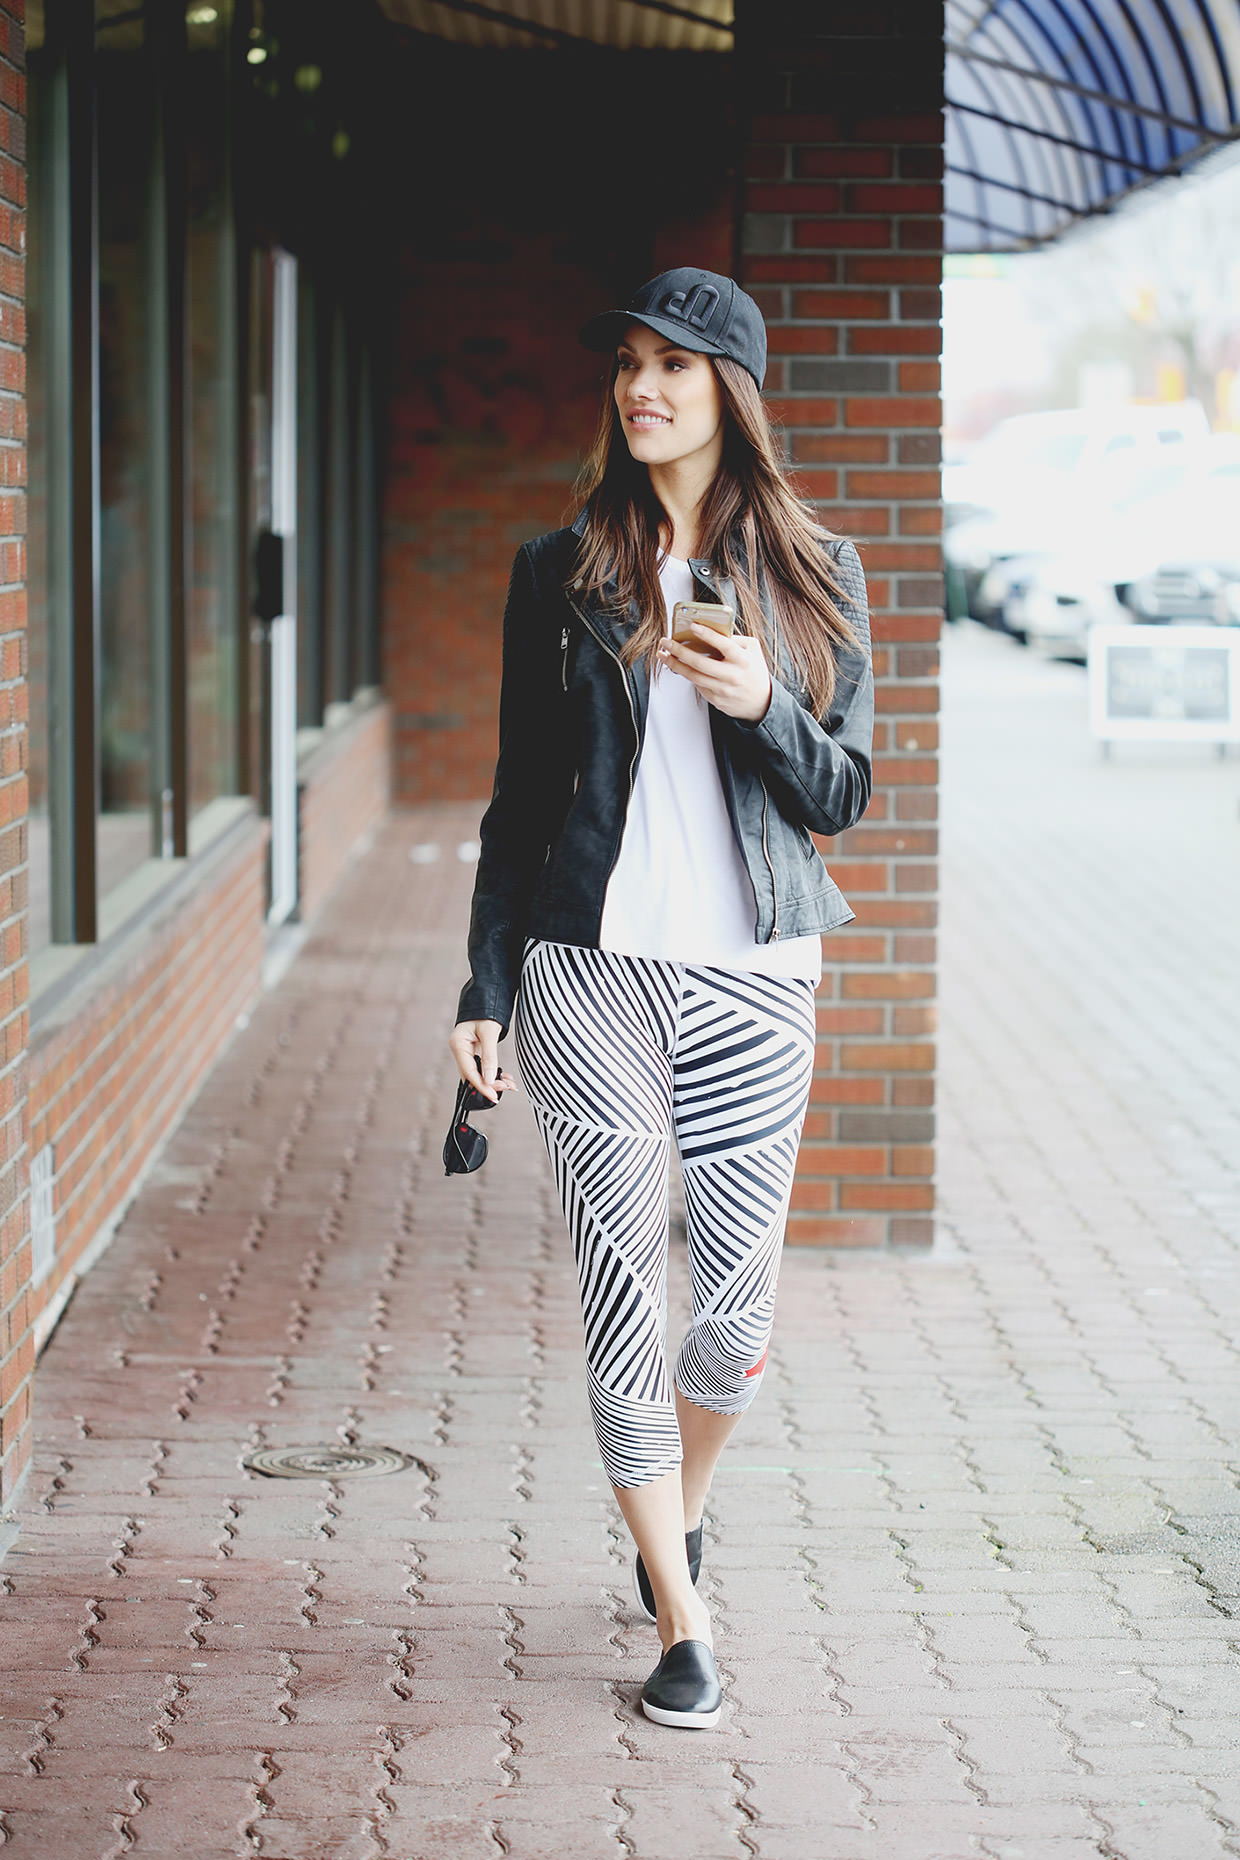 Silver Icing Encore: 3 Ways to Style a Faux Leather Jacket